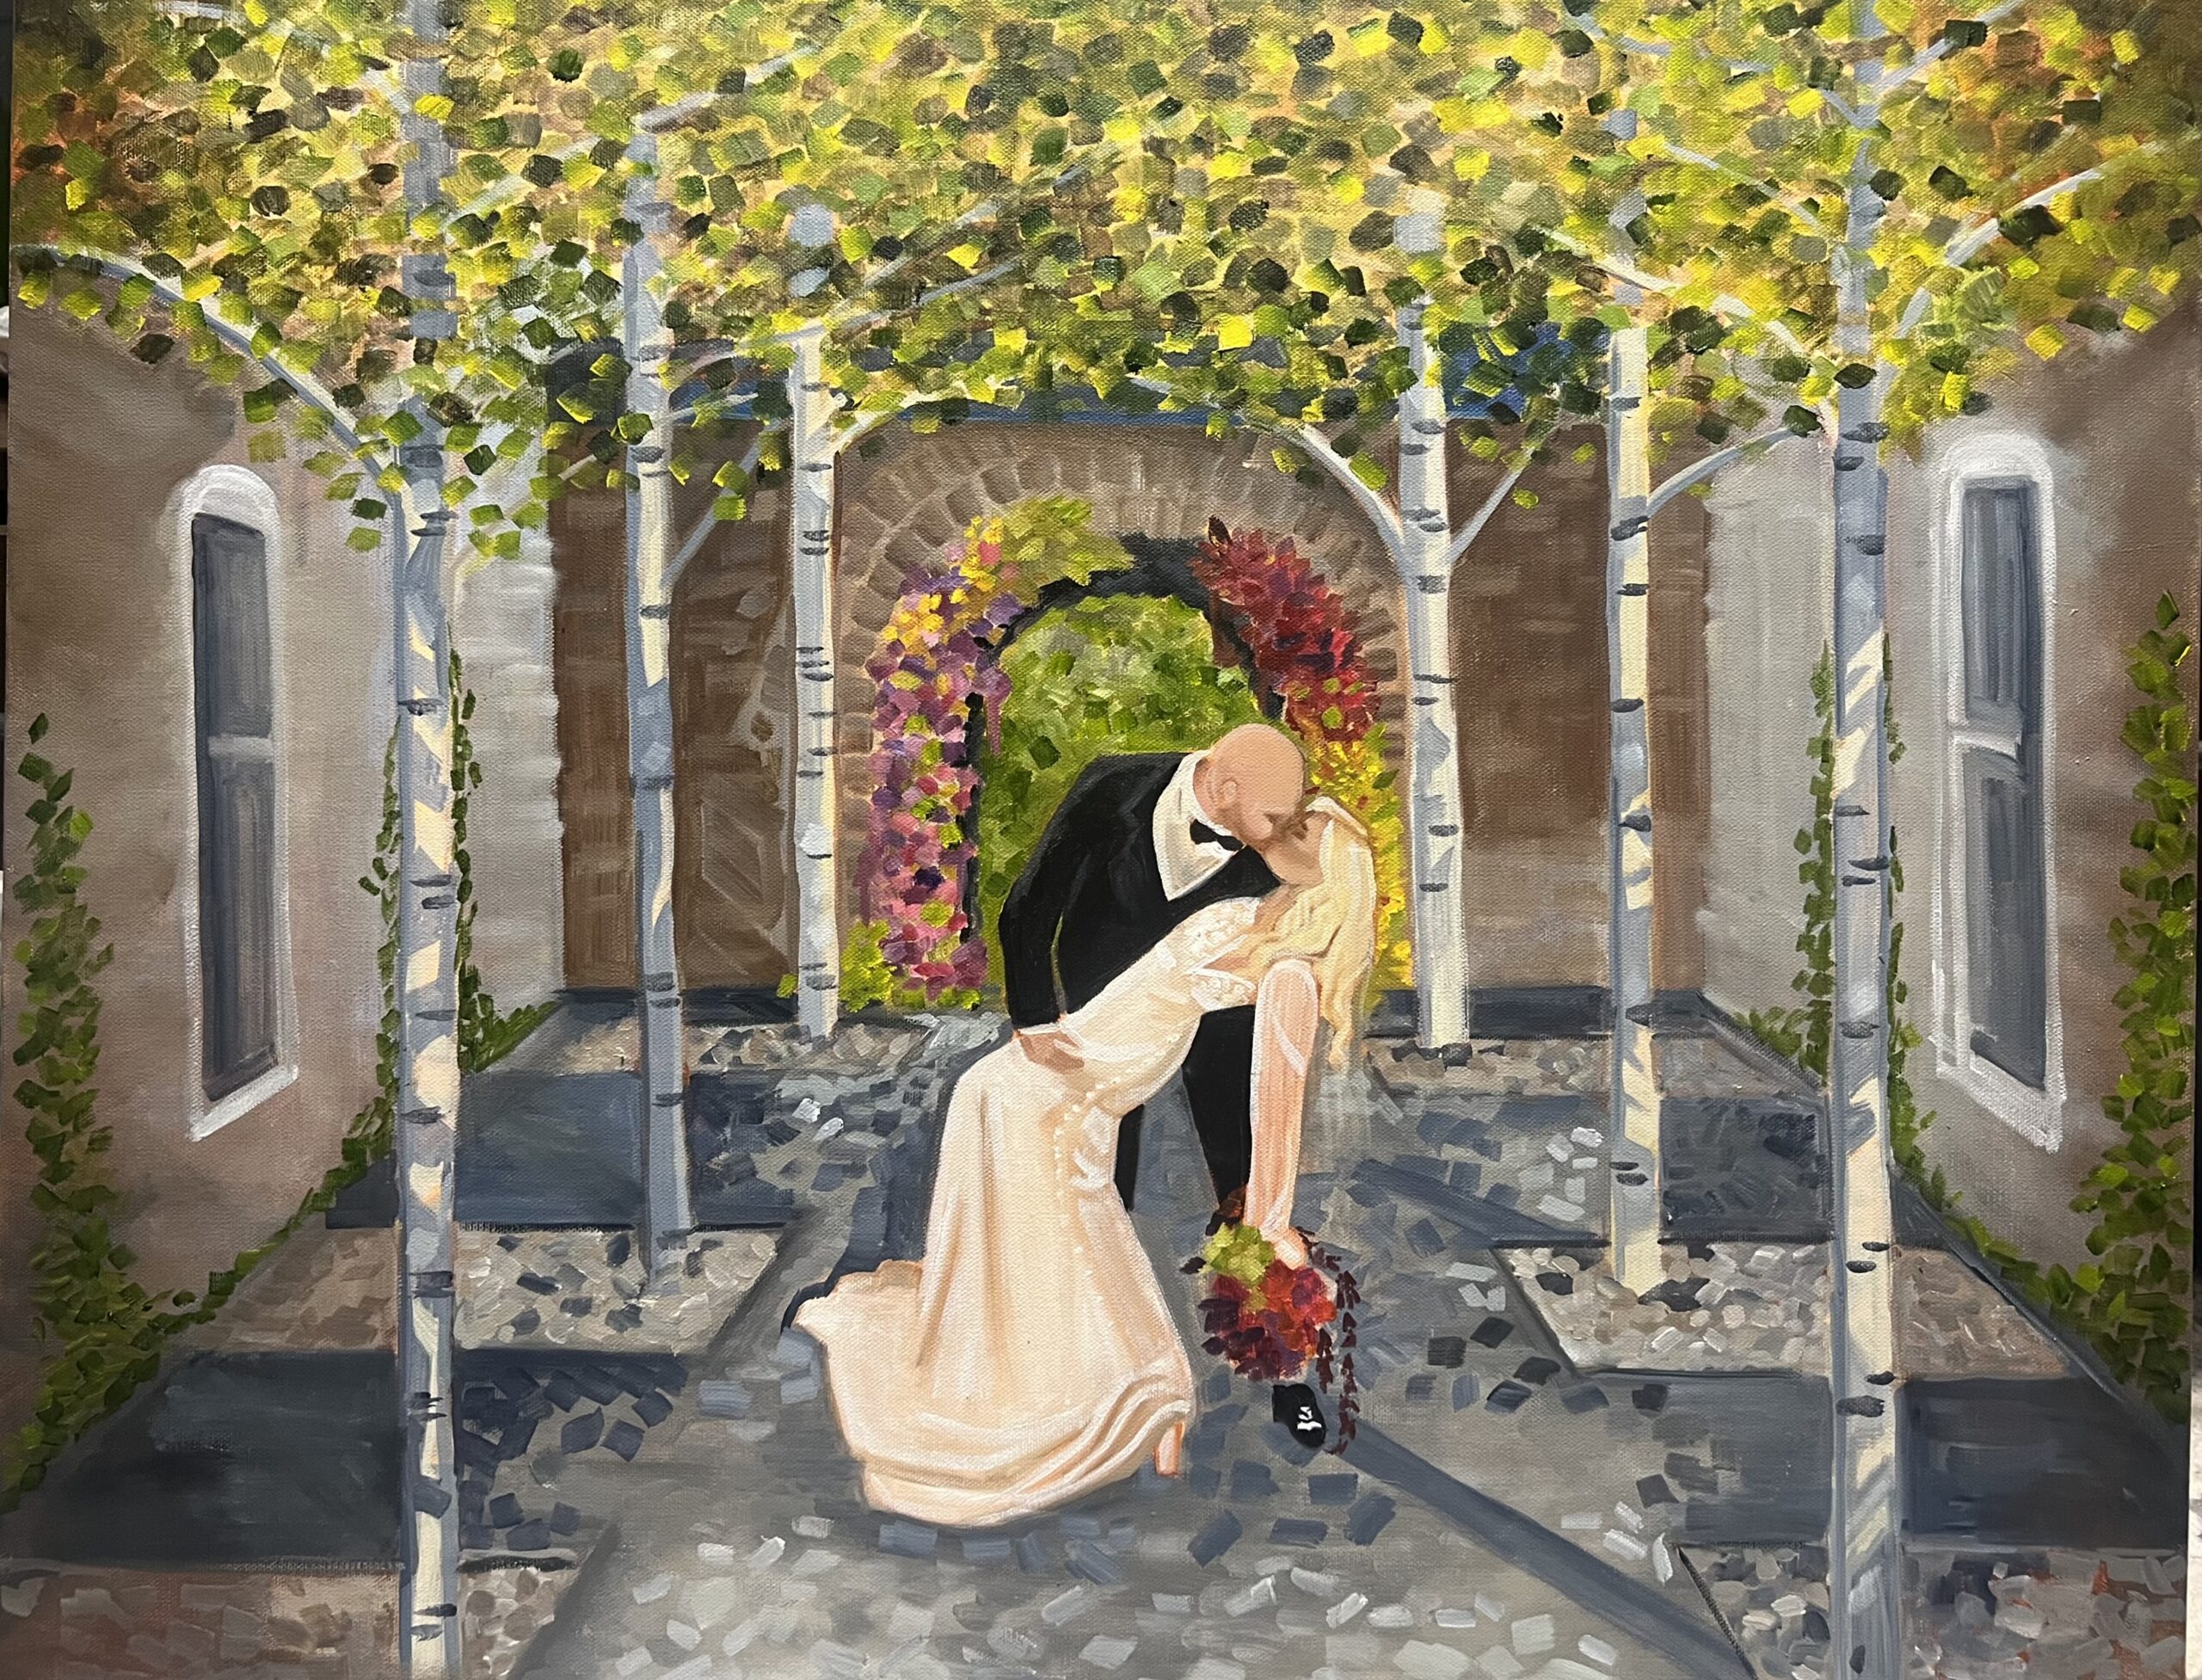 An oil portrait depicting a bride and groom sharing a dip kiss at the end of an aisle lined with colorful aspen trees. At the Surf Hotel in Buena Vista, Colorado